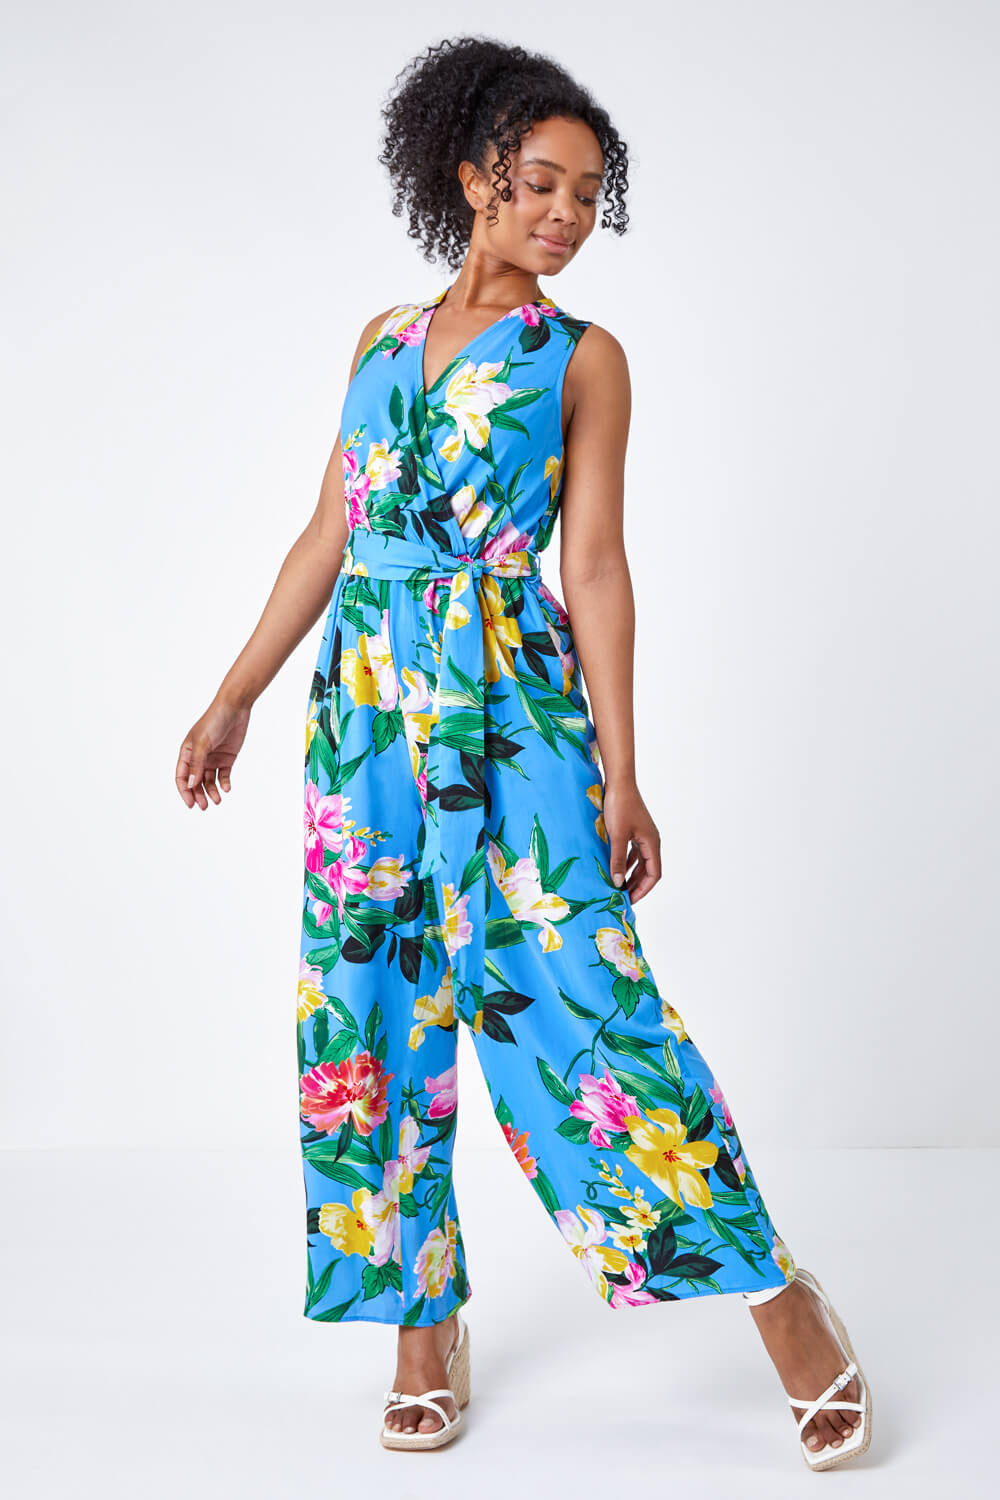 Turquoise Petite Floral Print Stretch Jumpsuit, Image 2 of 5